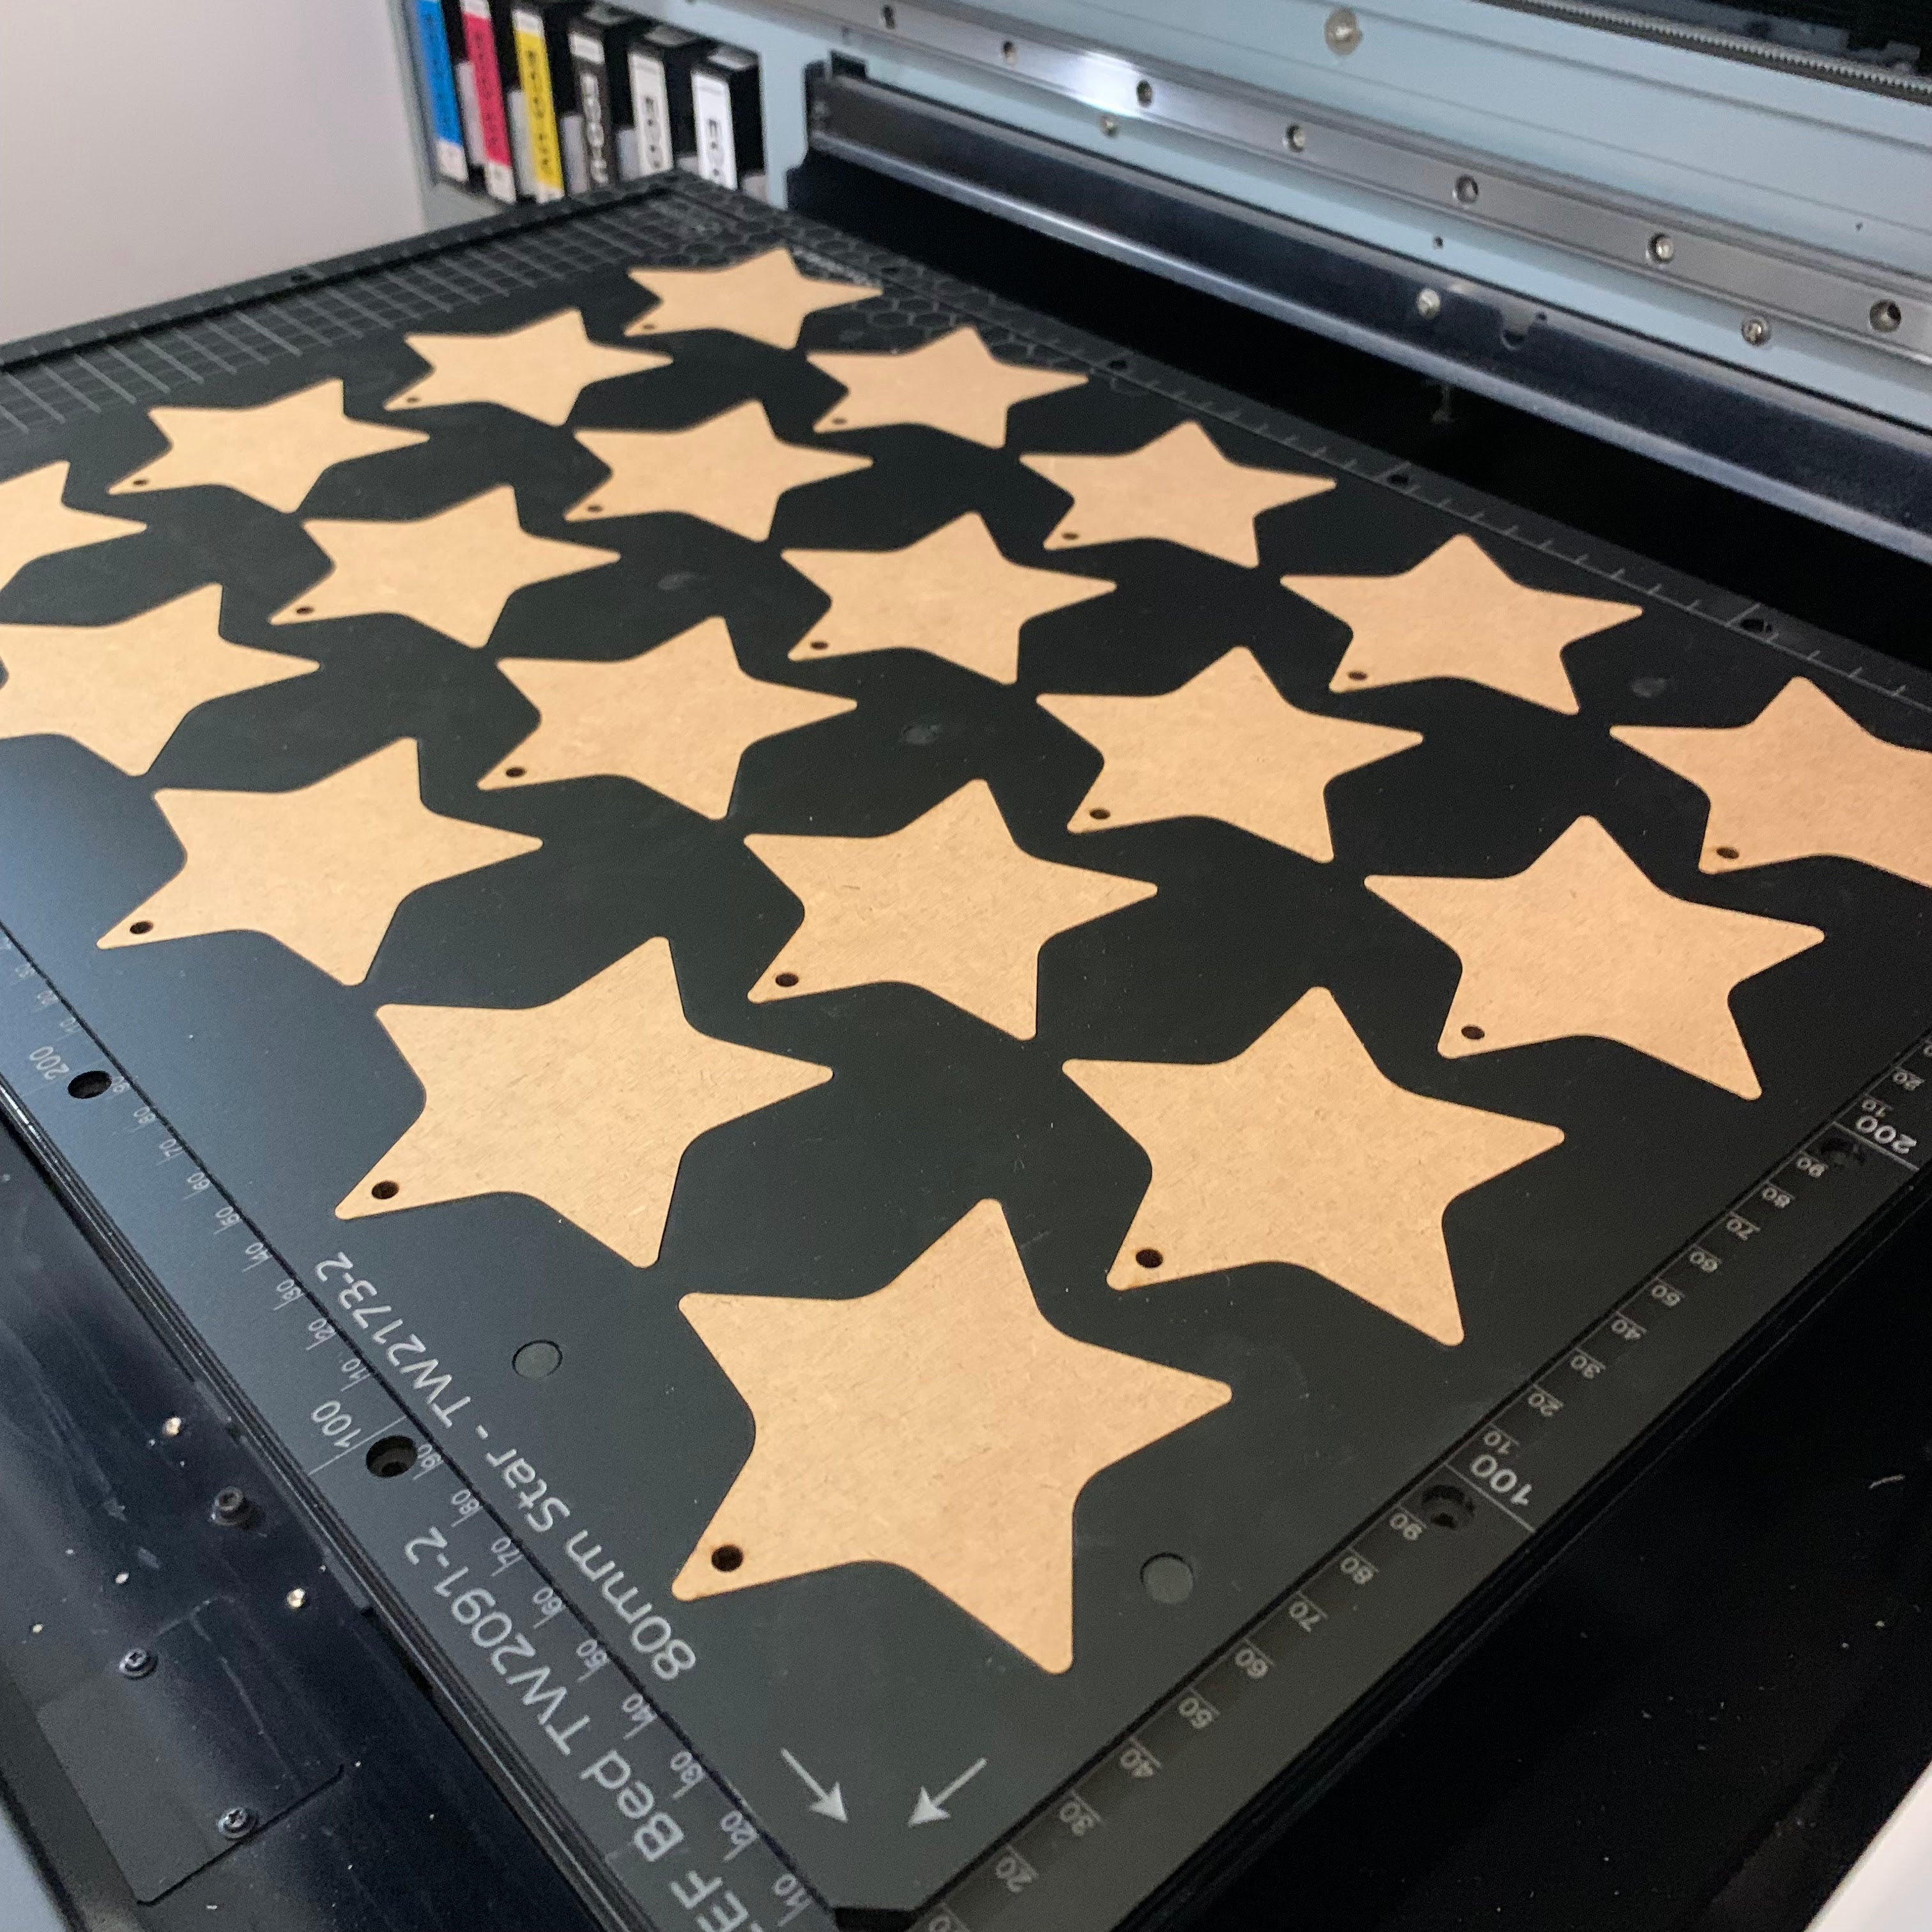 Printing Jig for 72mm Star Blanks - Mimaki UJF-7151 Flatbed Printer (48 Spaces)